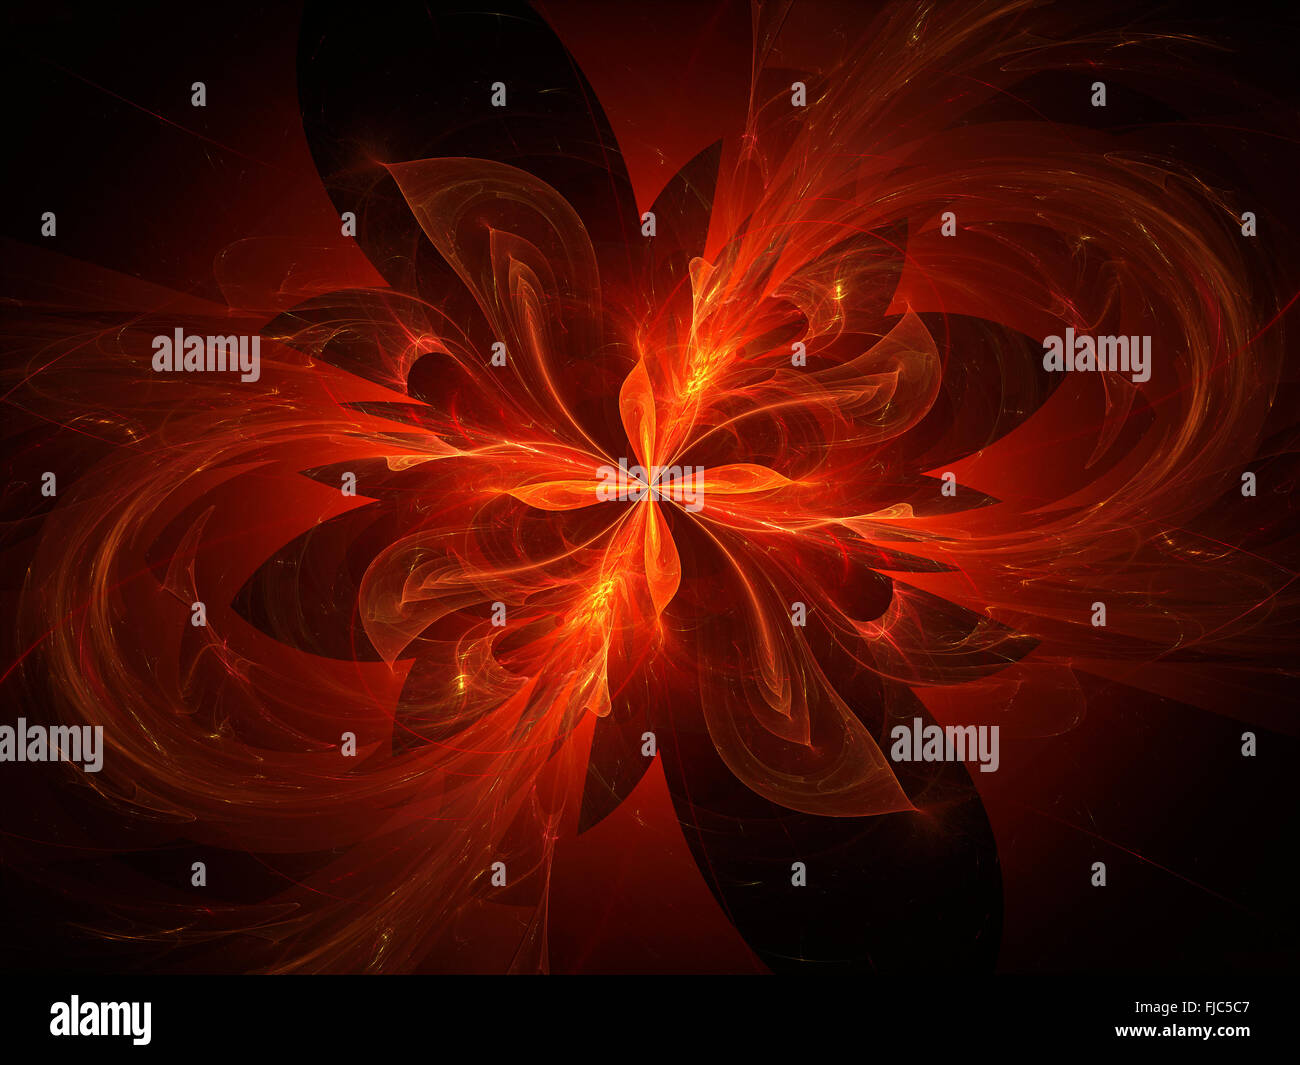 Glowing four dimensional flames in space, computer generated abstract background Stock Photo